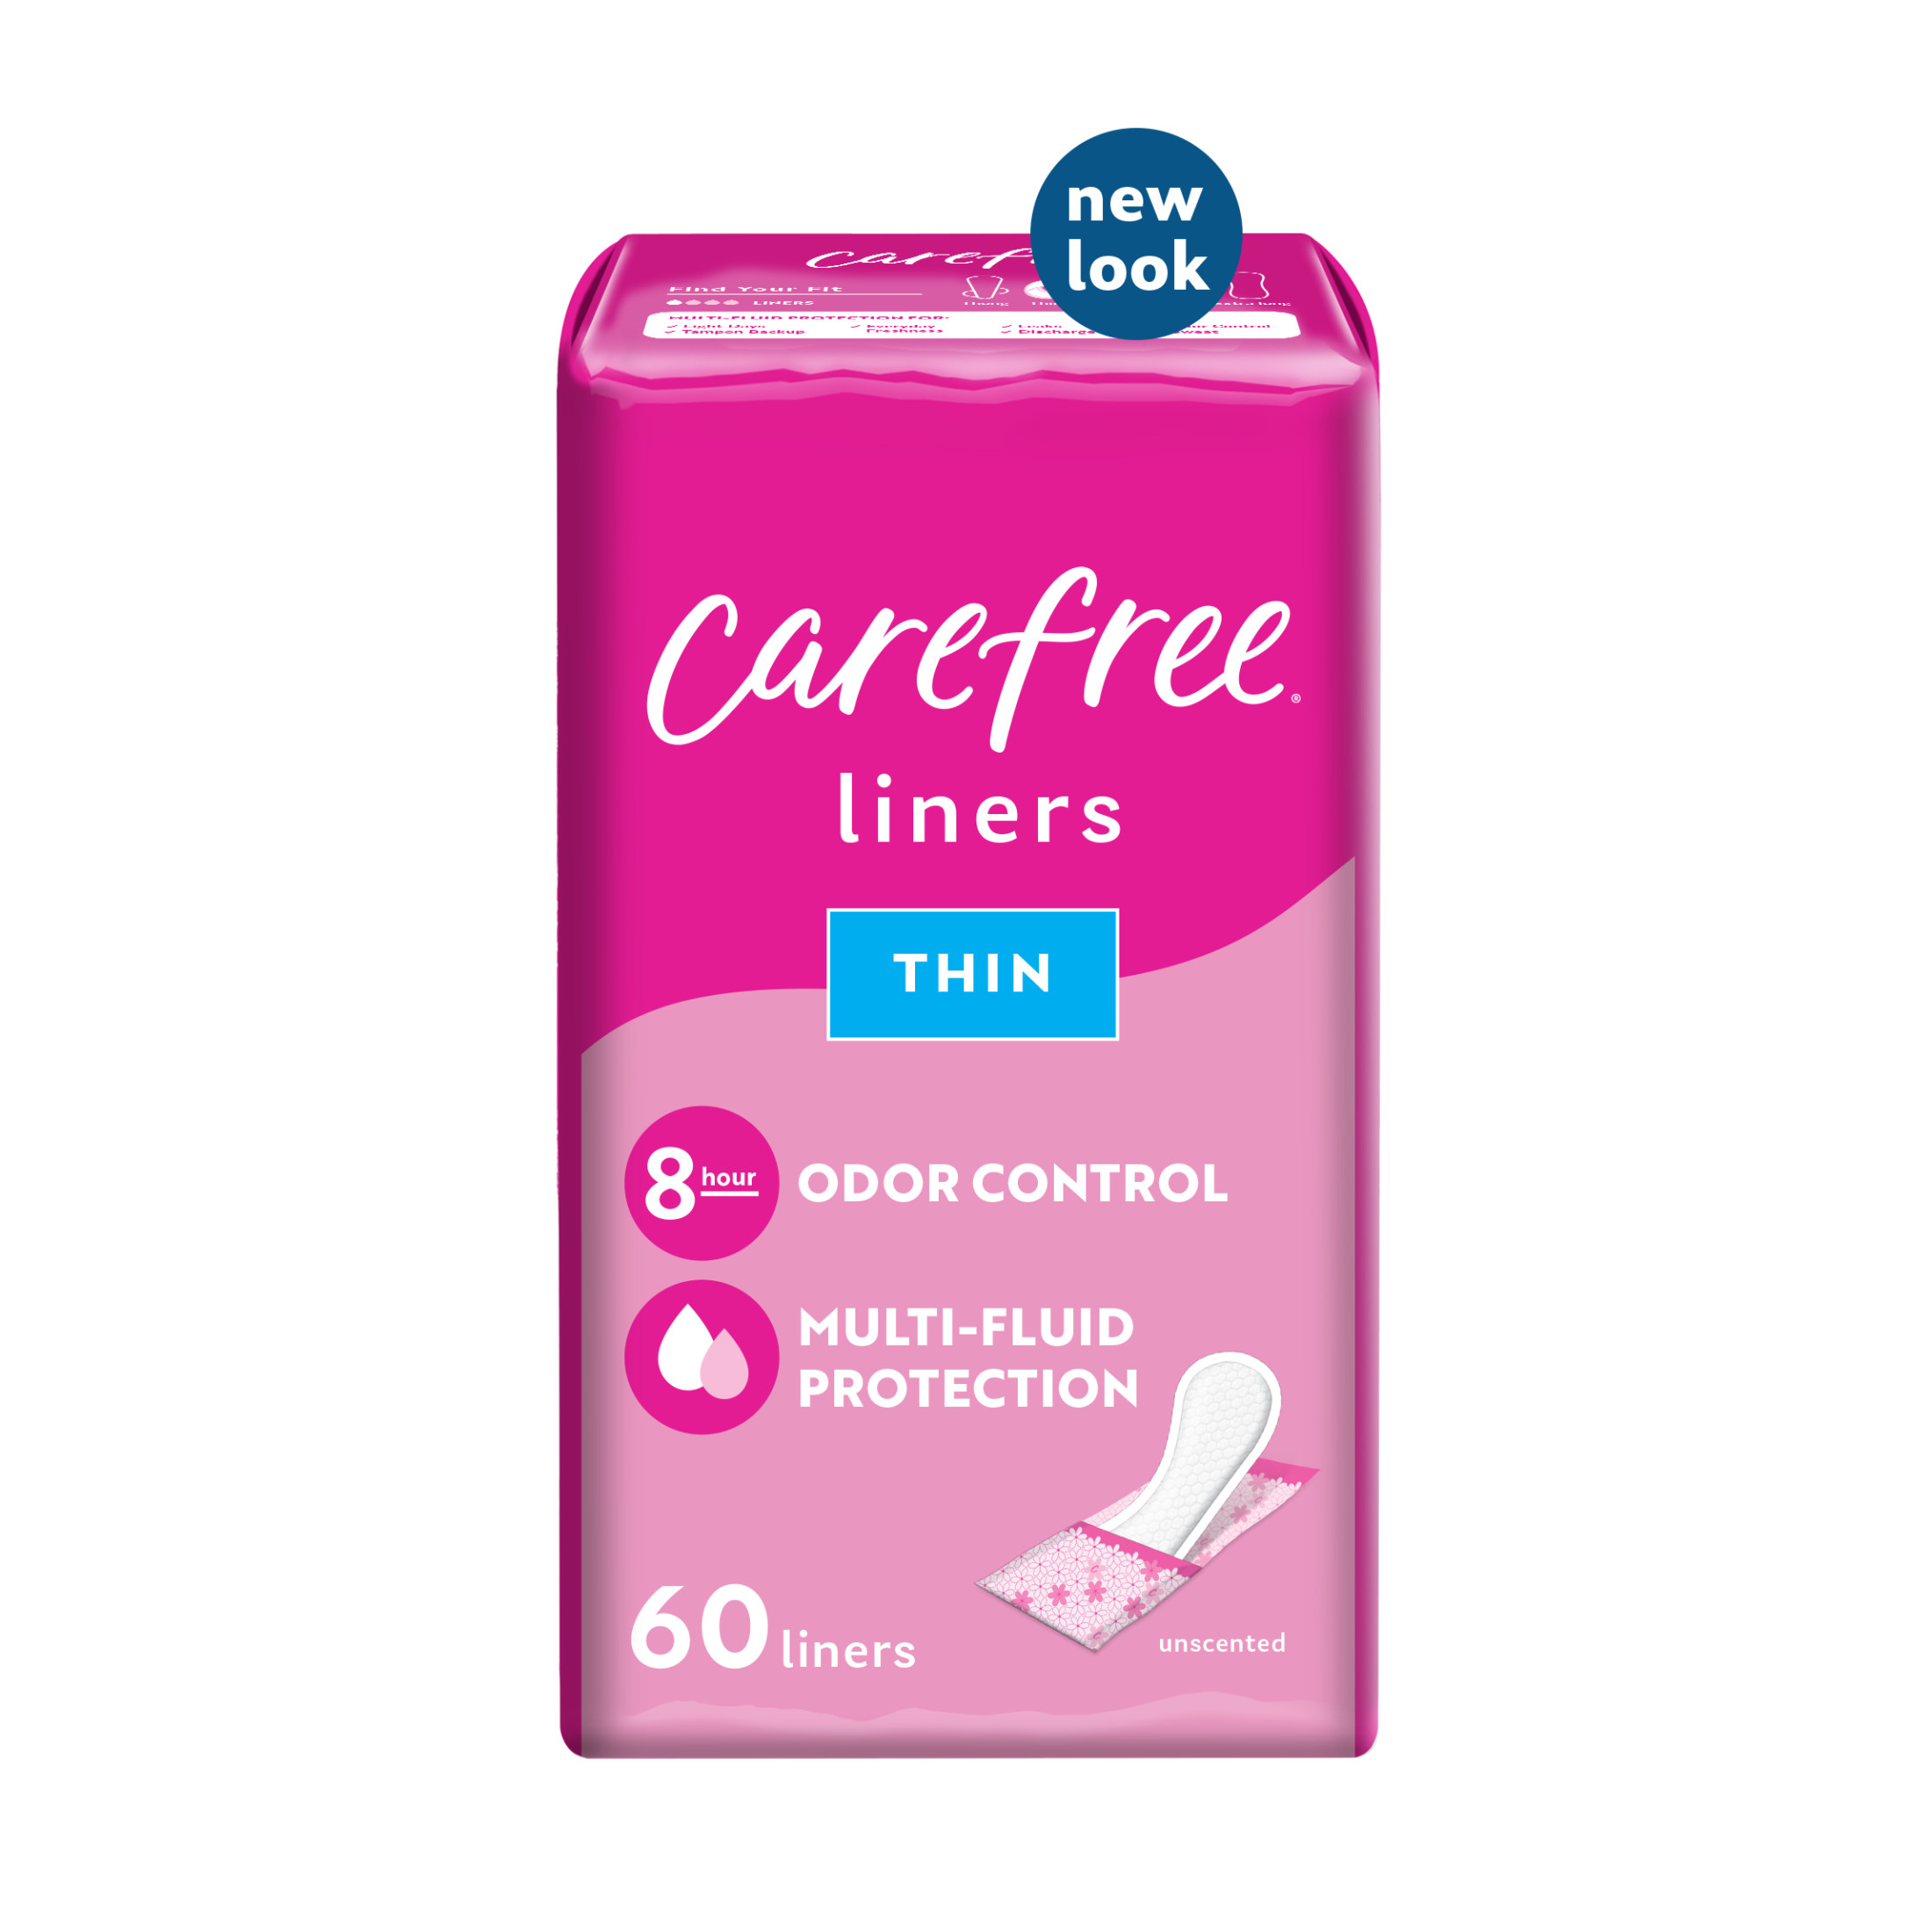 CAREFREE® Panty Liners, Thin To Go, Unscented, 8 Hour Odor Control, 60ct - image 1 of 10